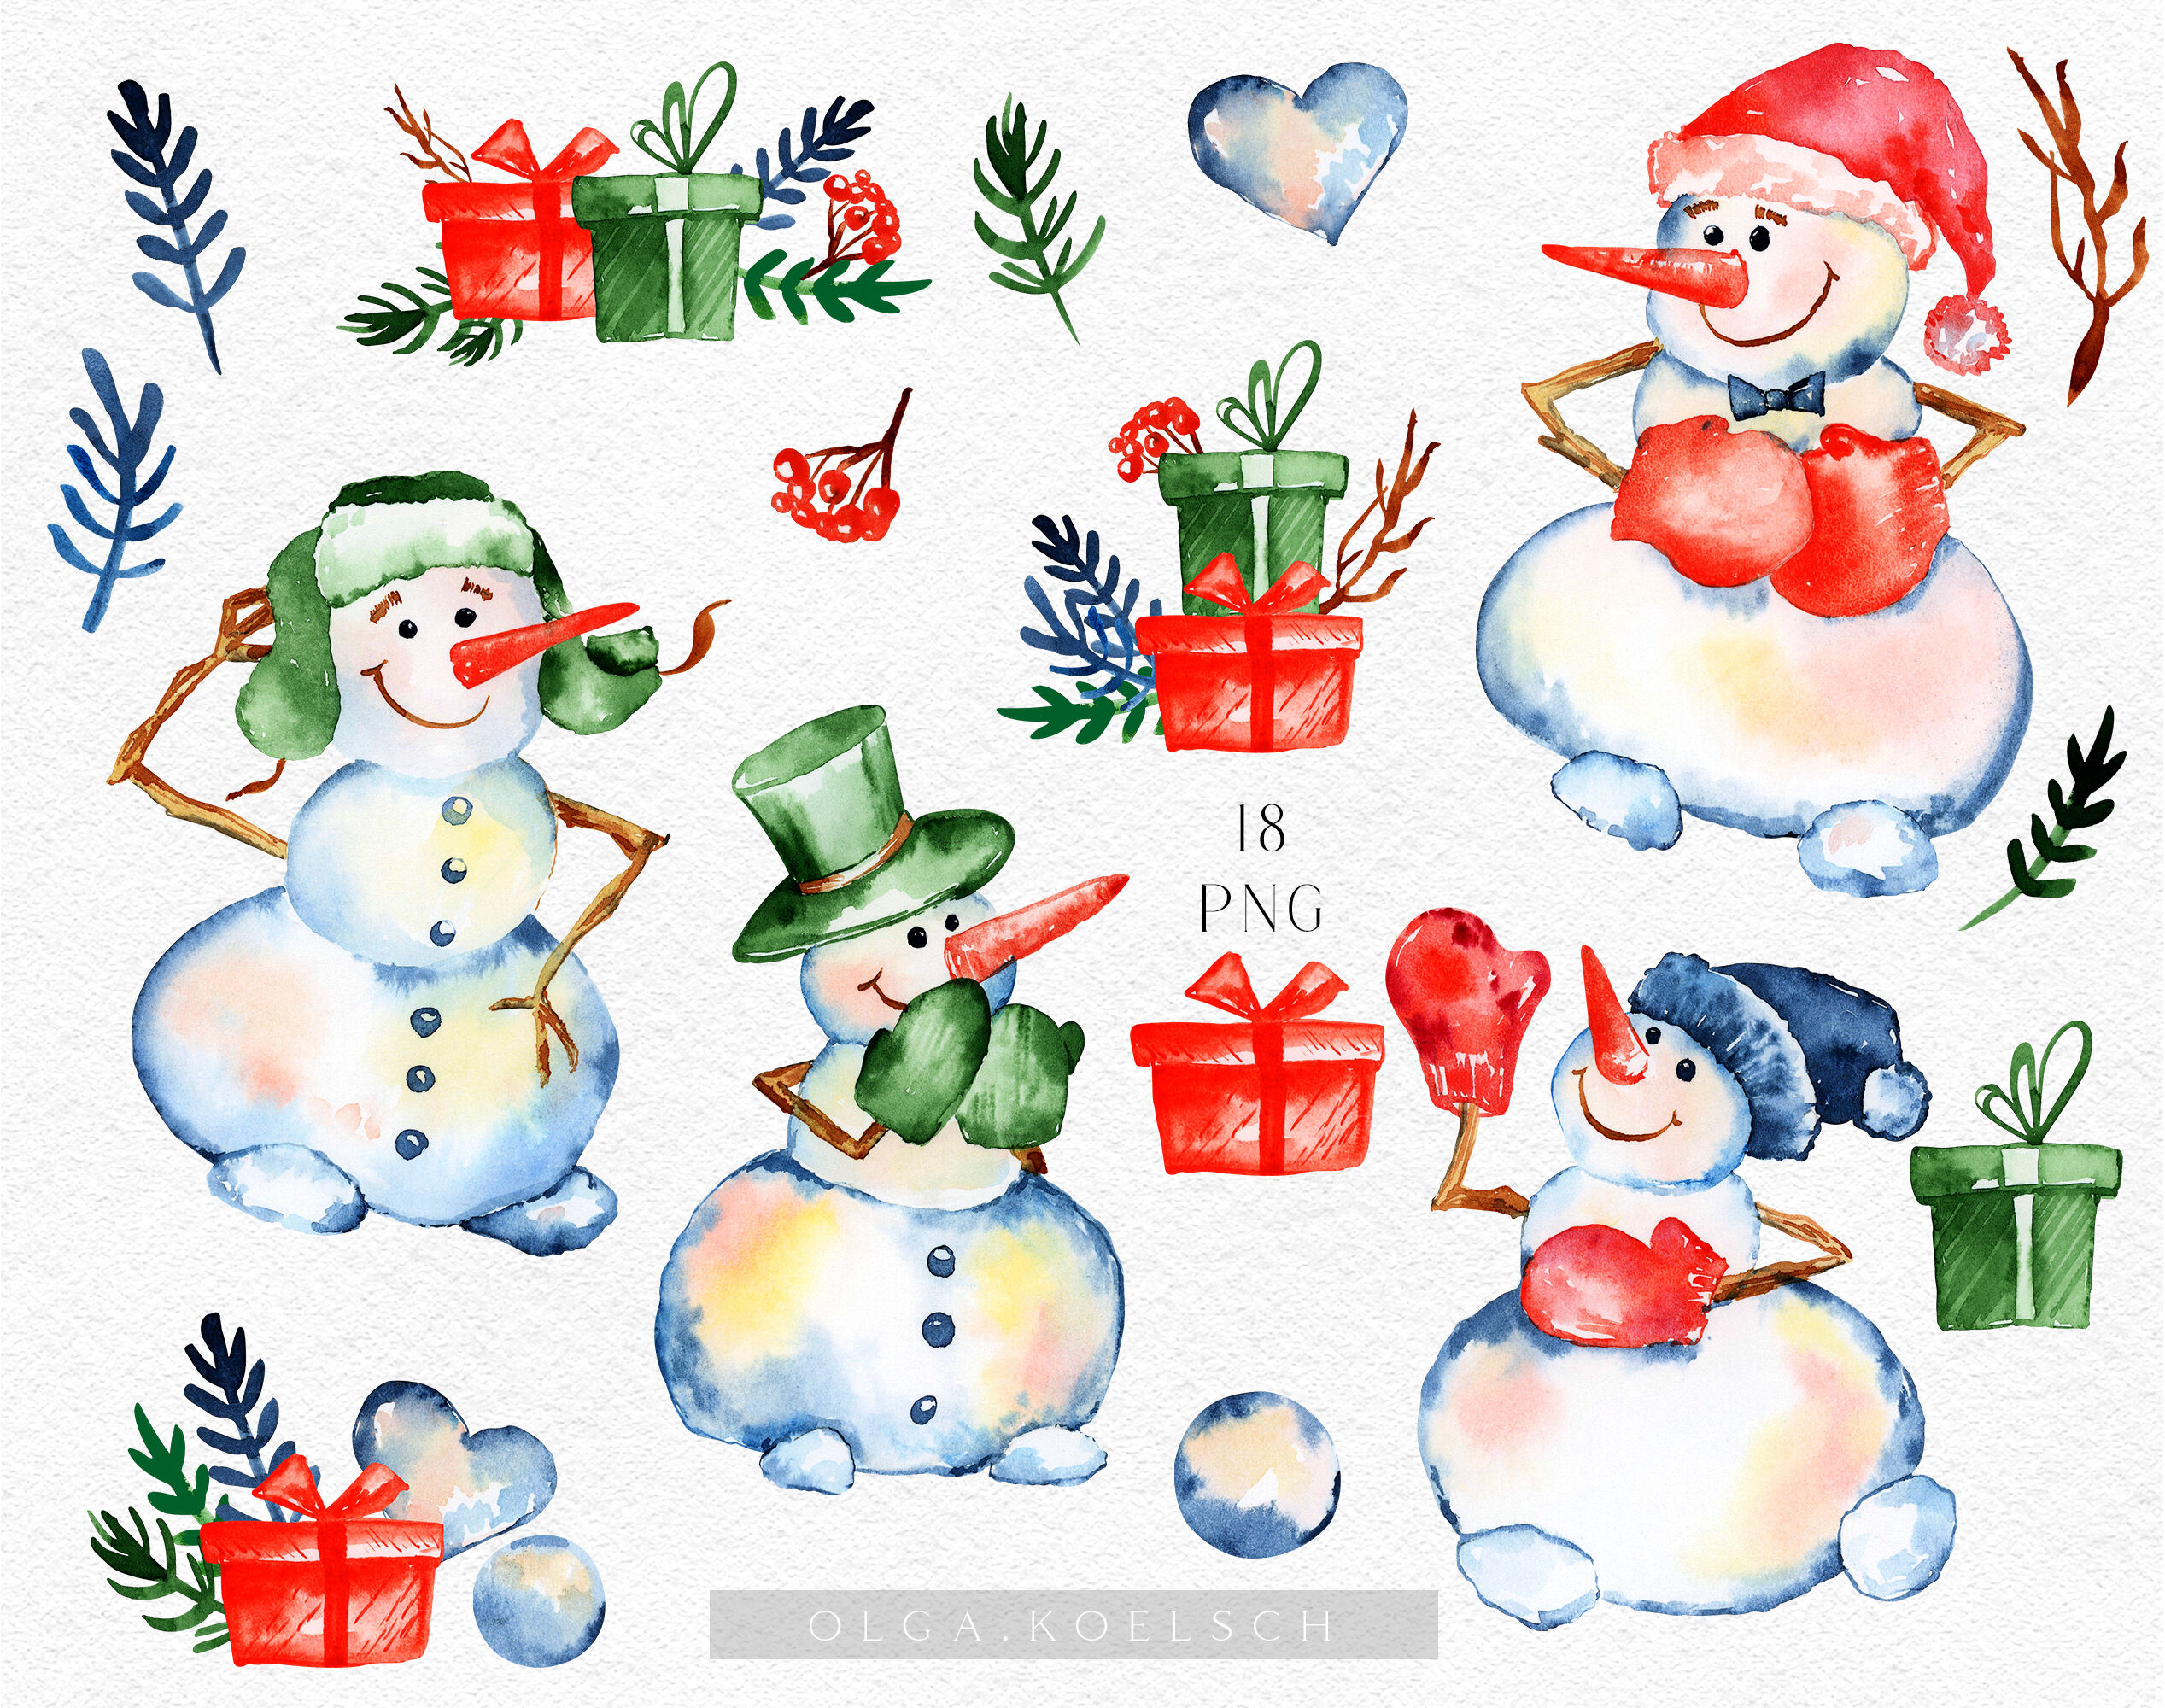 snowman holding sign clipart png